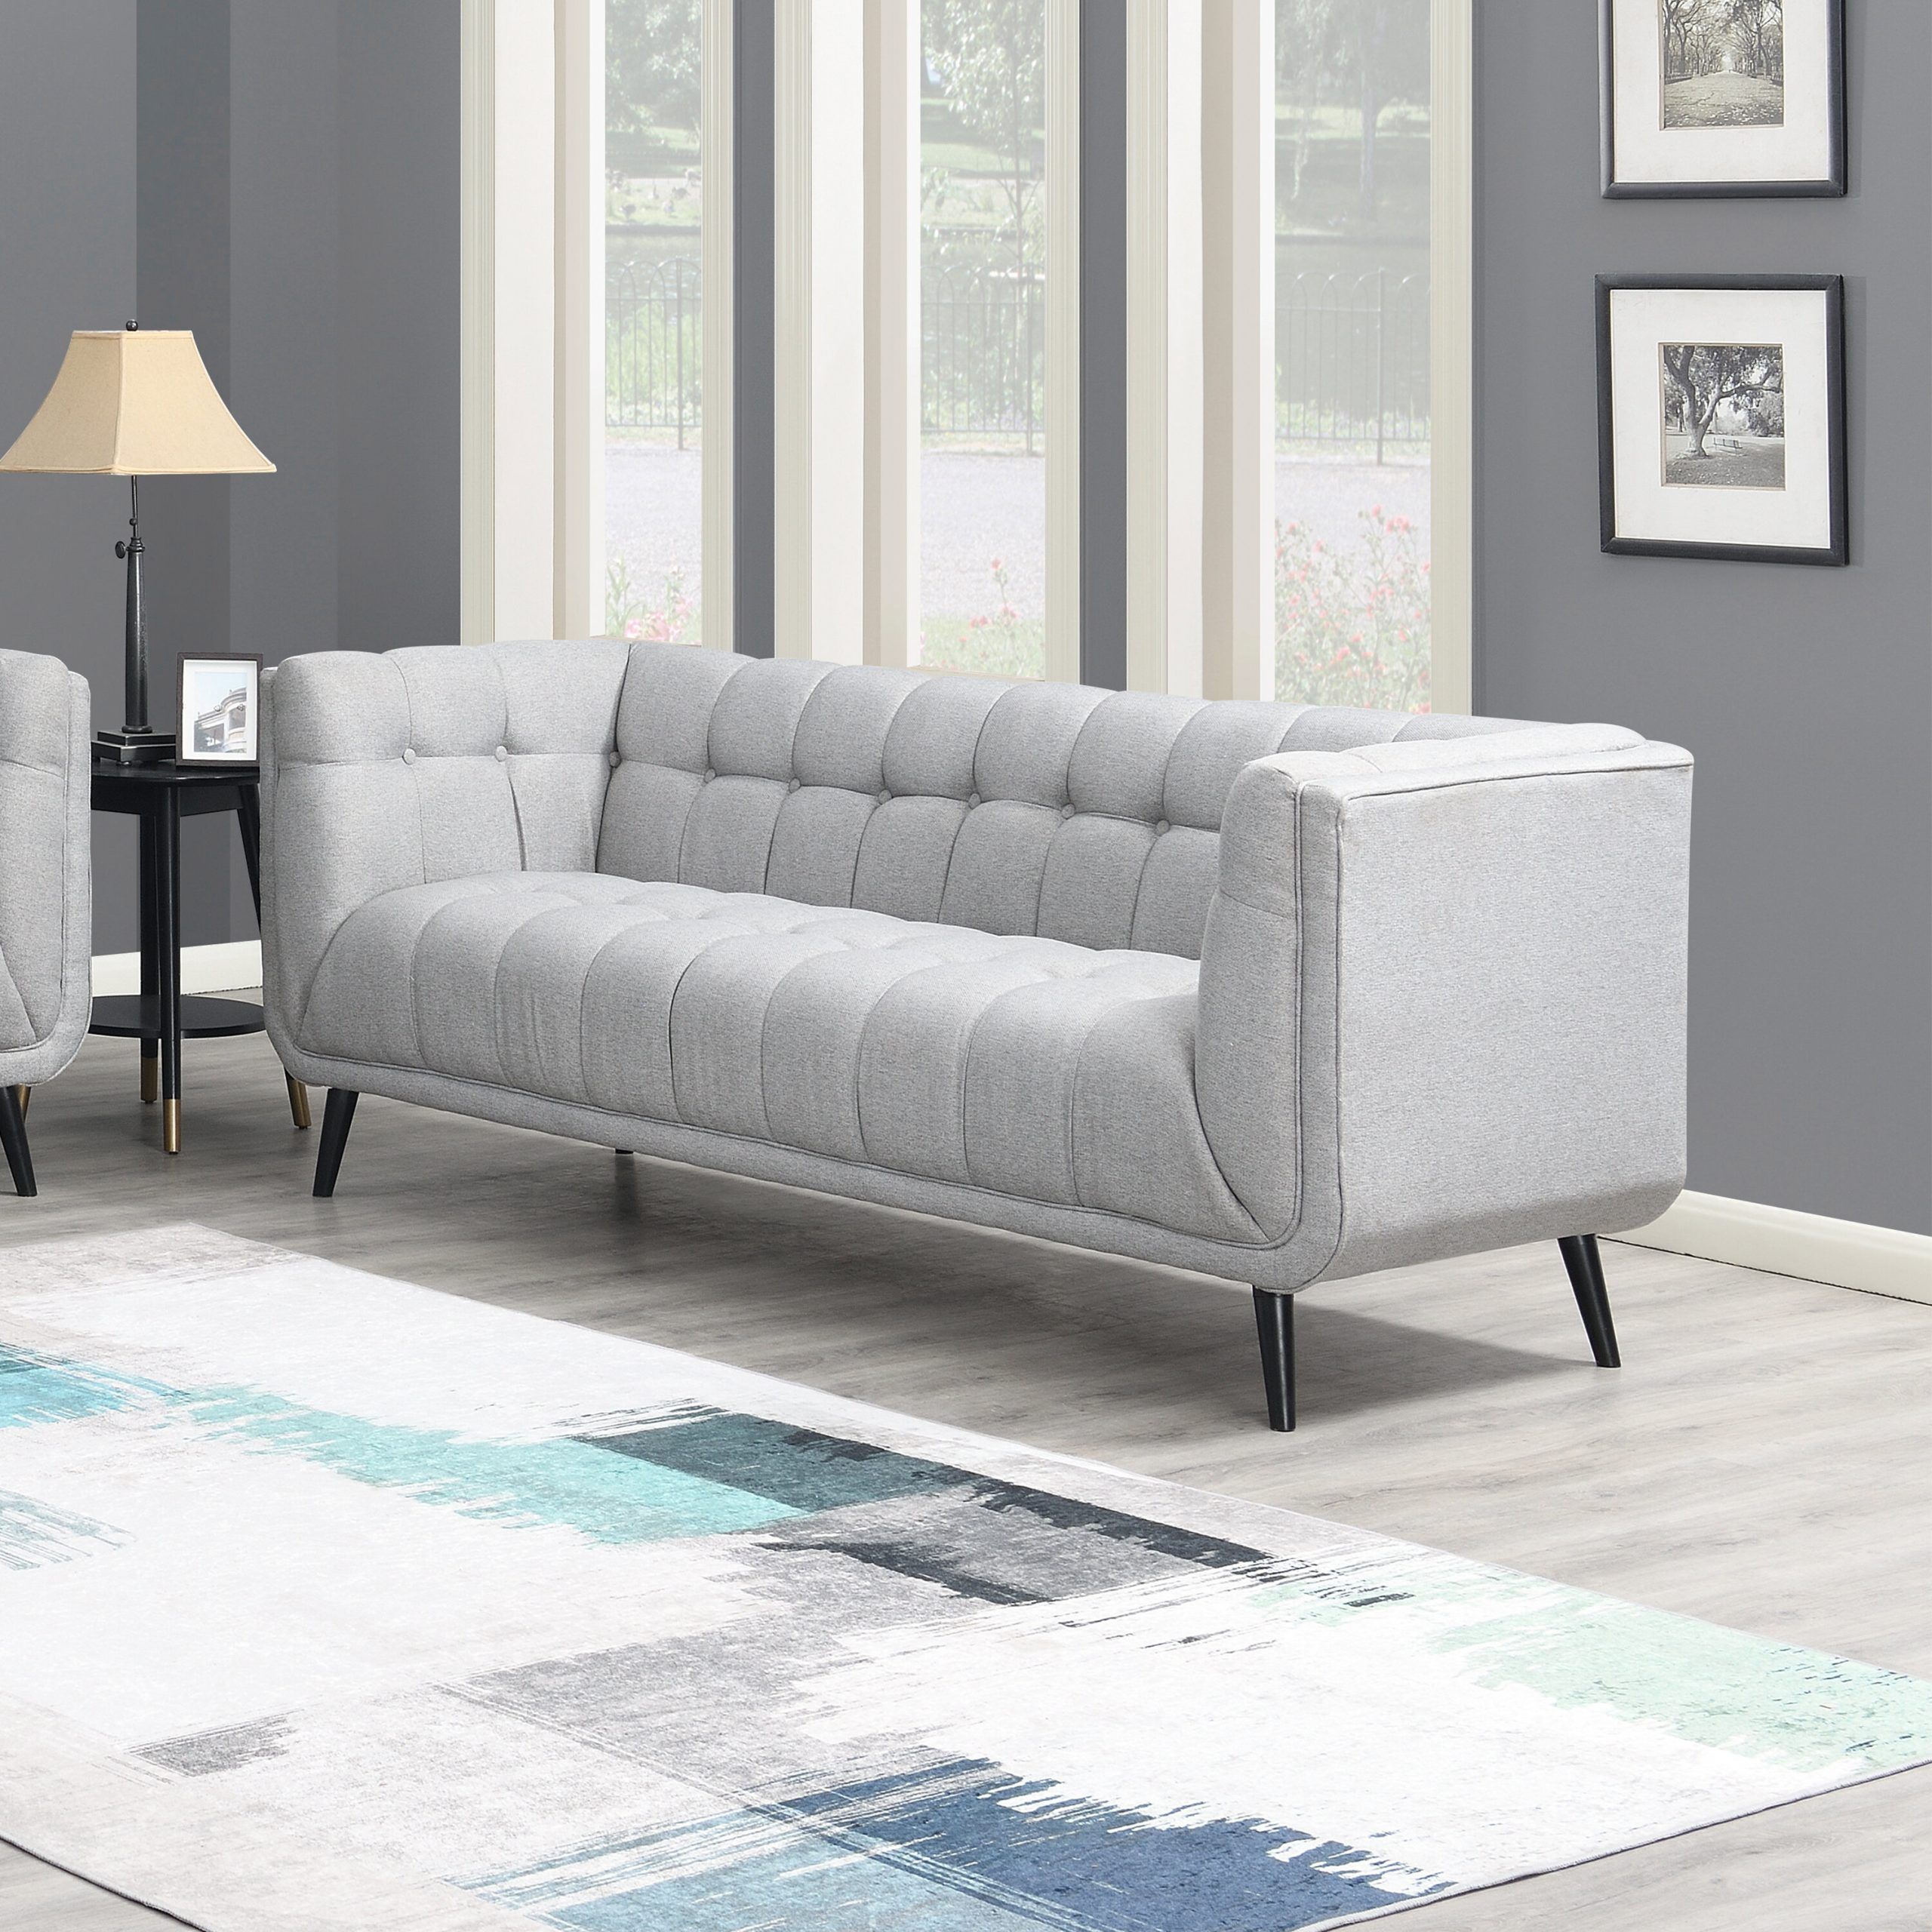 Corrigan Studio® Modern Mid Century Button Tufted Upholstered Sofa, Gray |  Wayfair Throughout Tufted Upholstered Sofas (View 6 of 15)